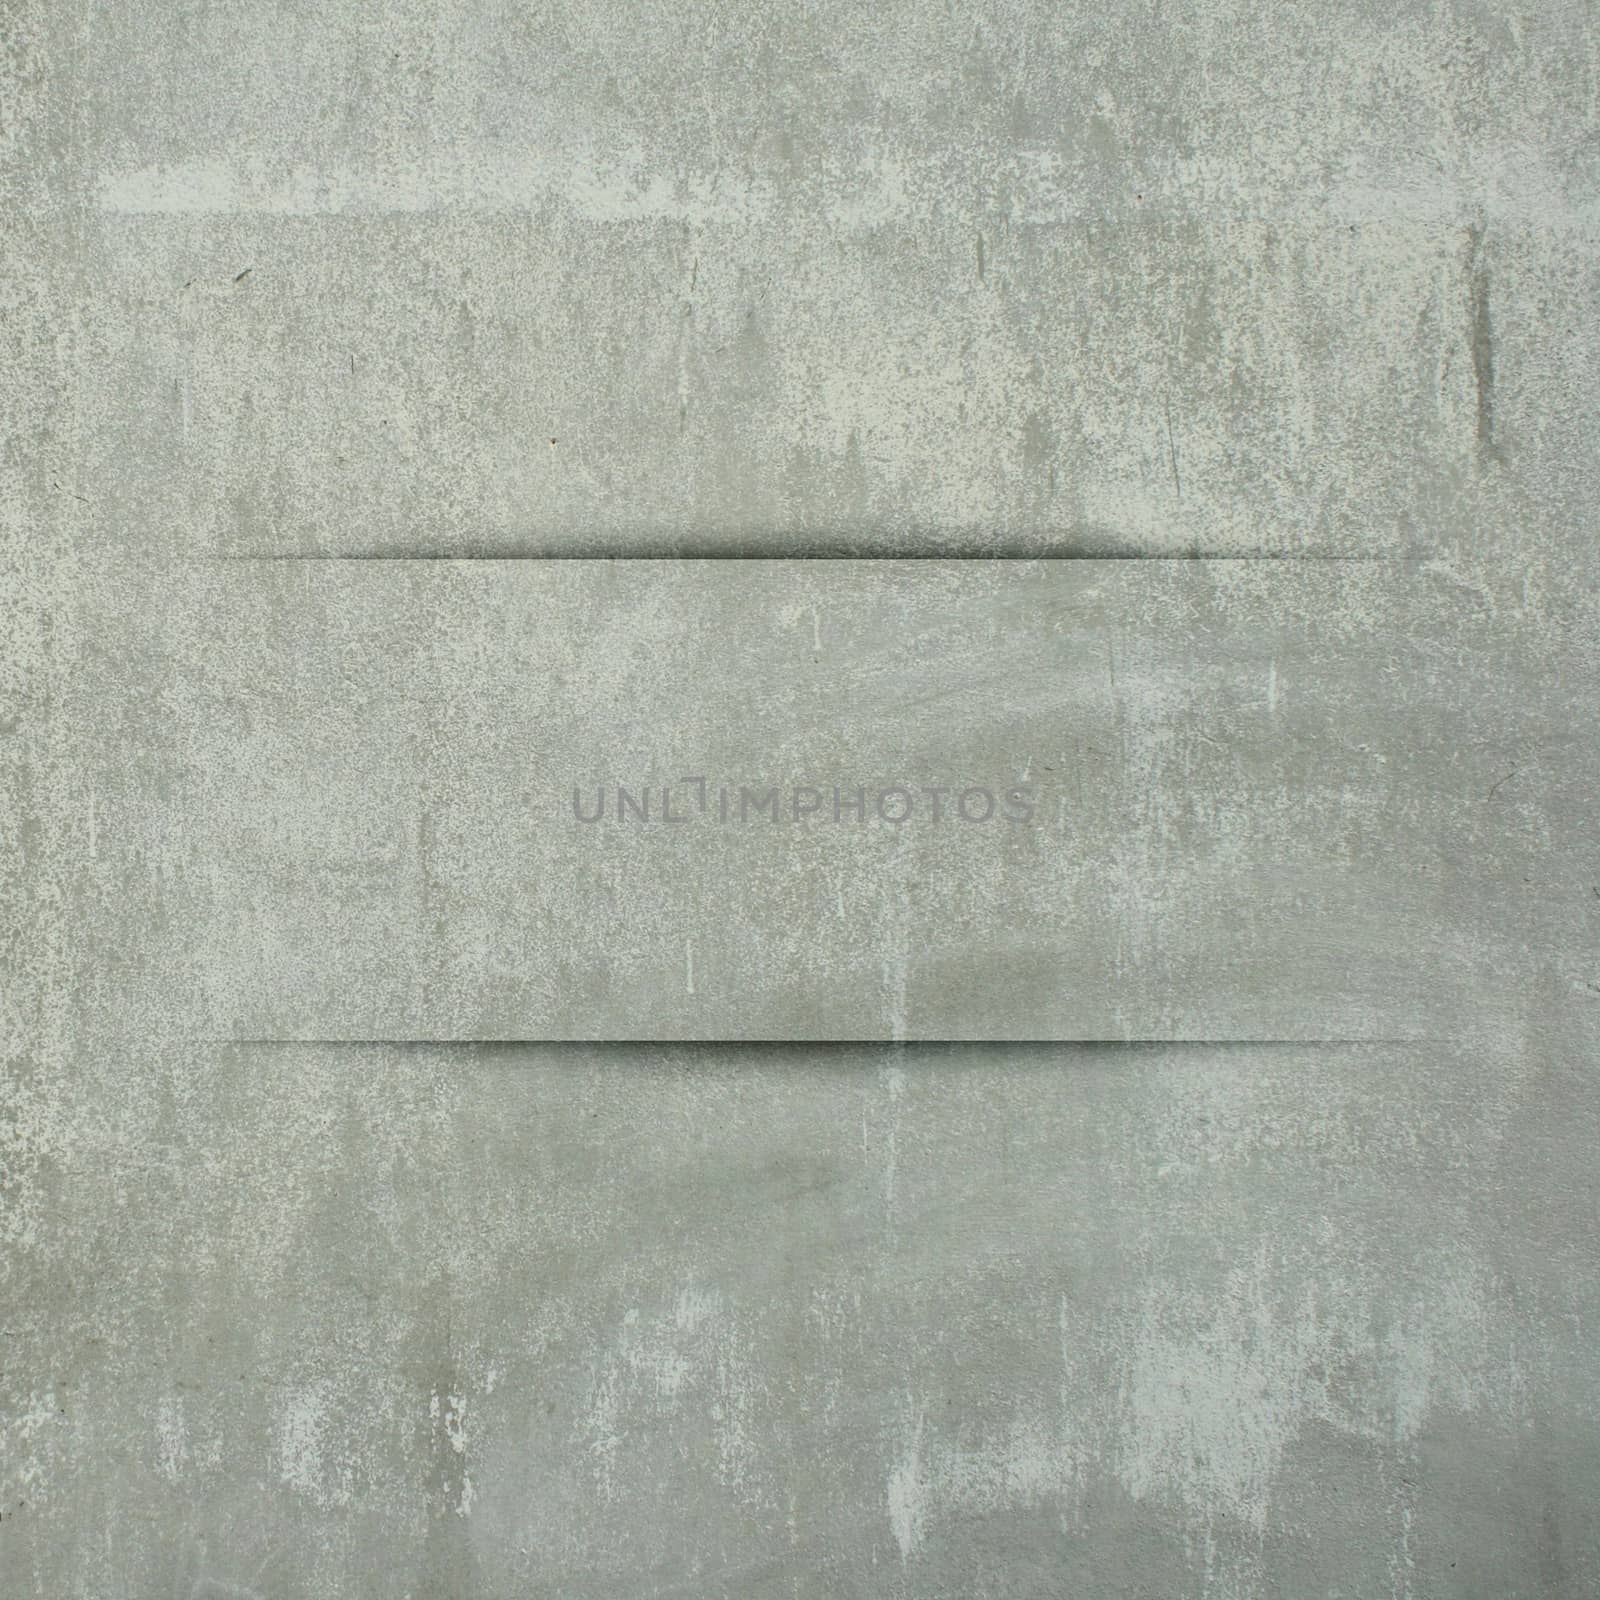 Cement wall texture with frame for background